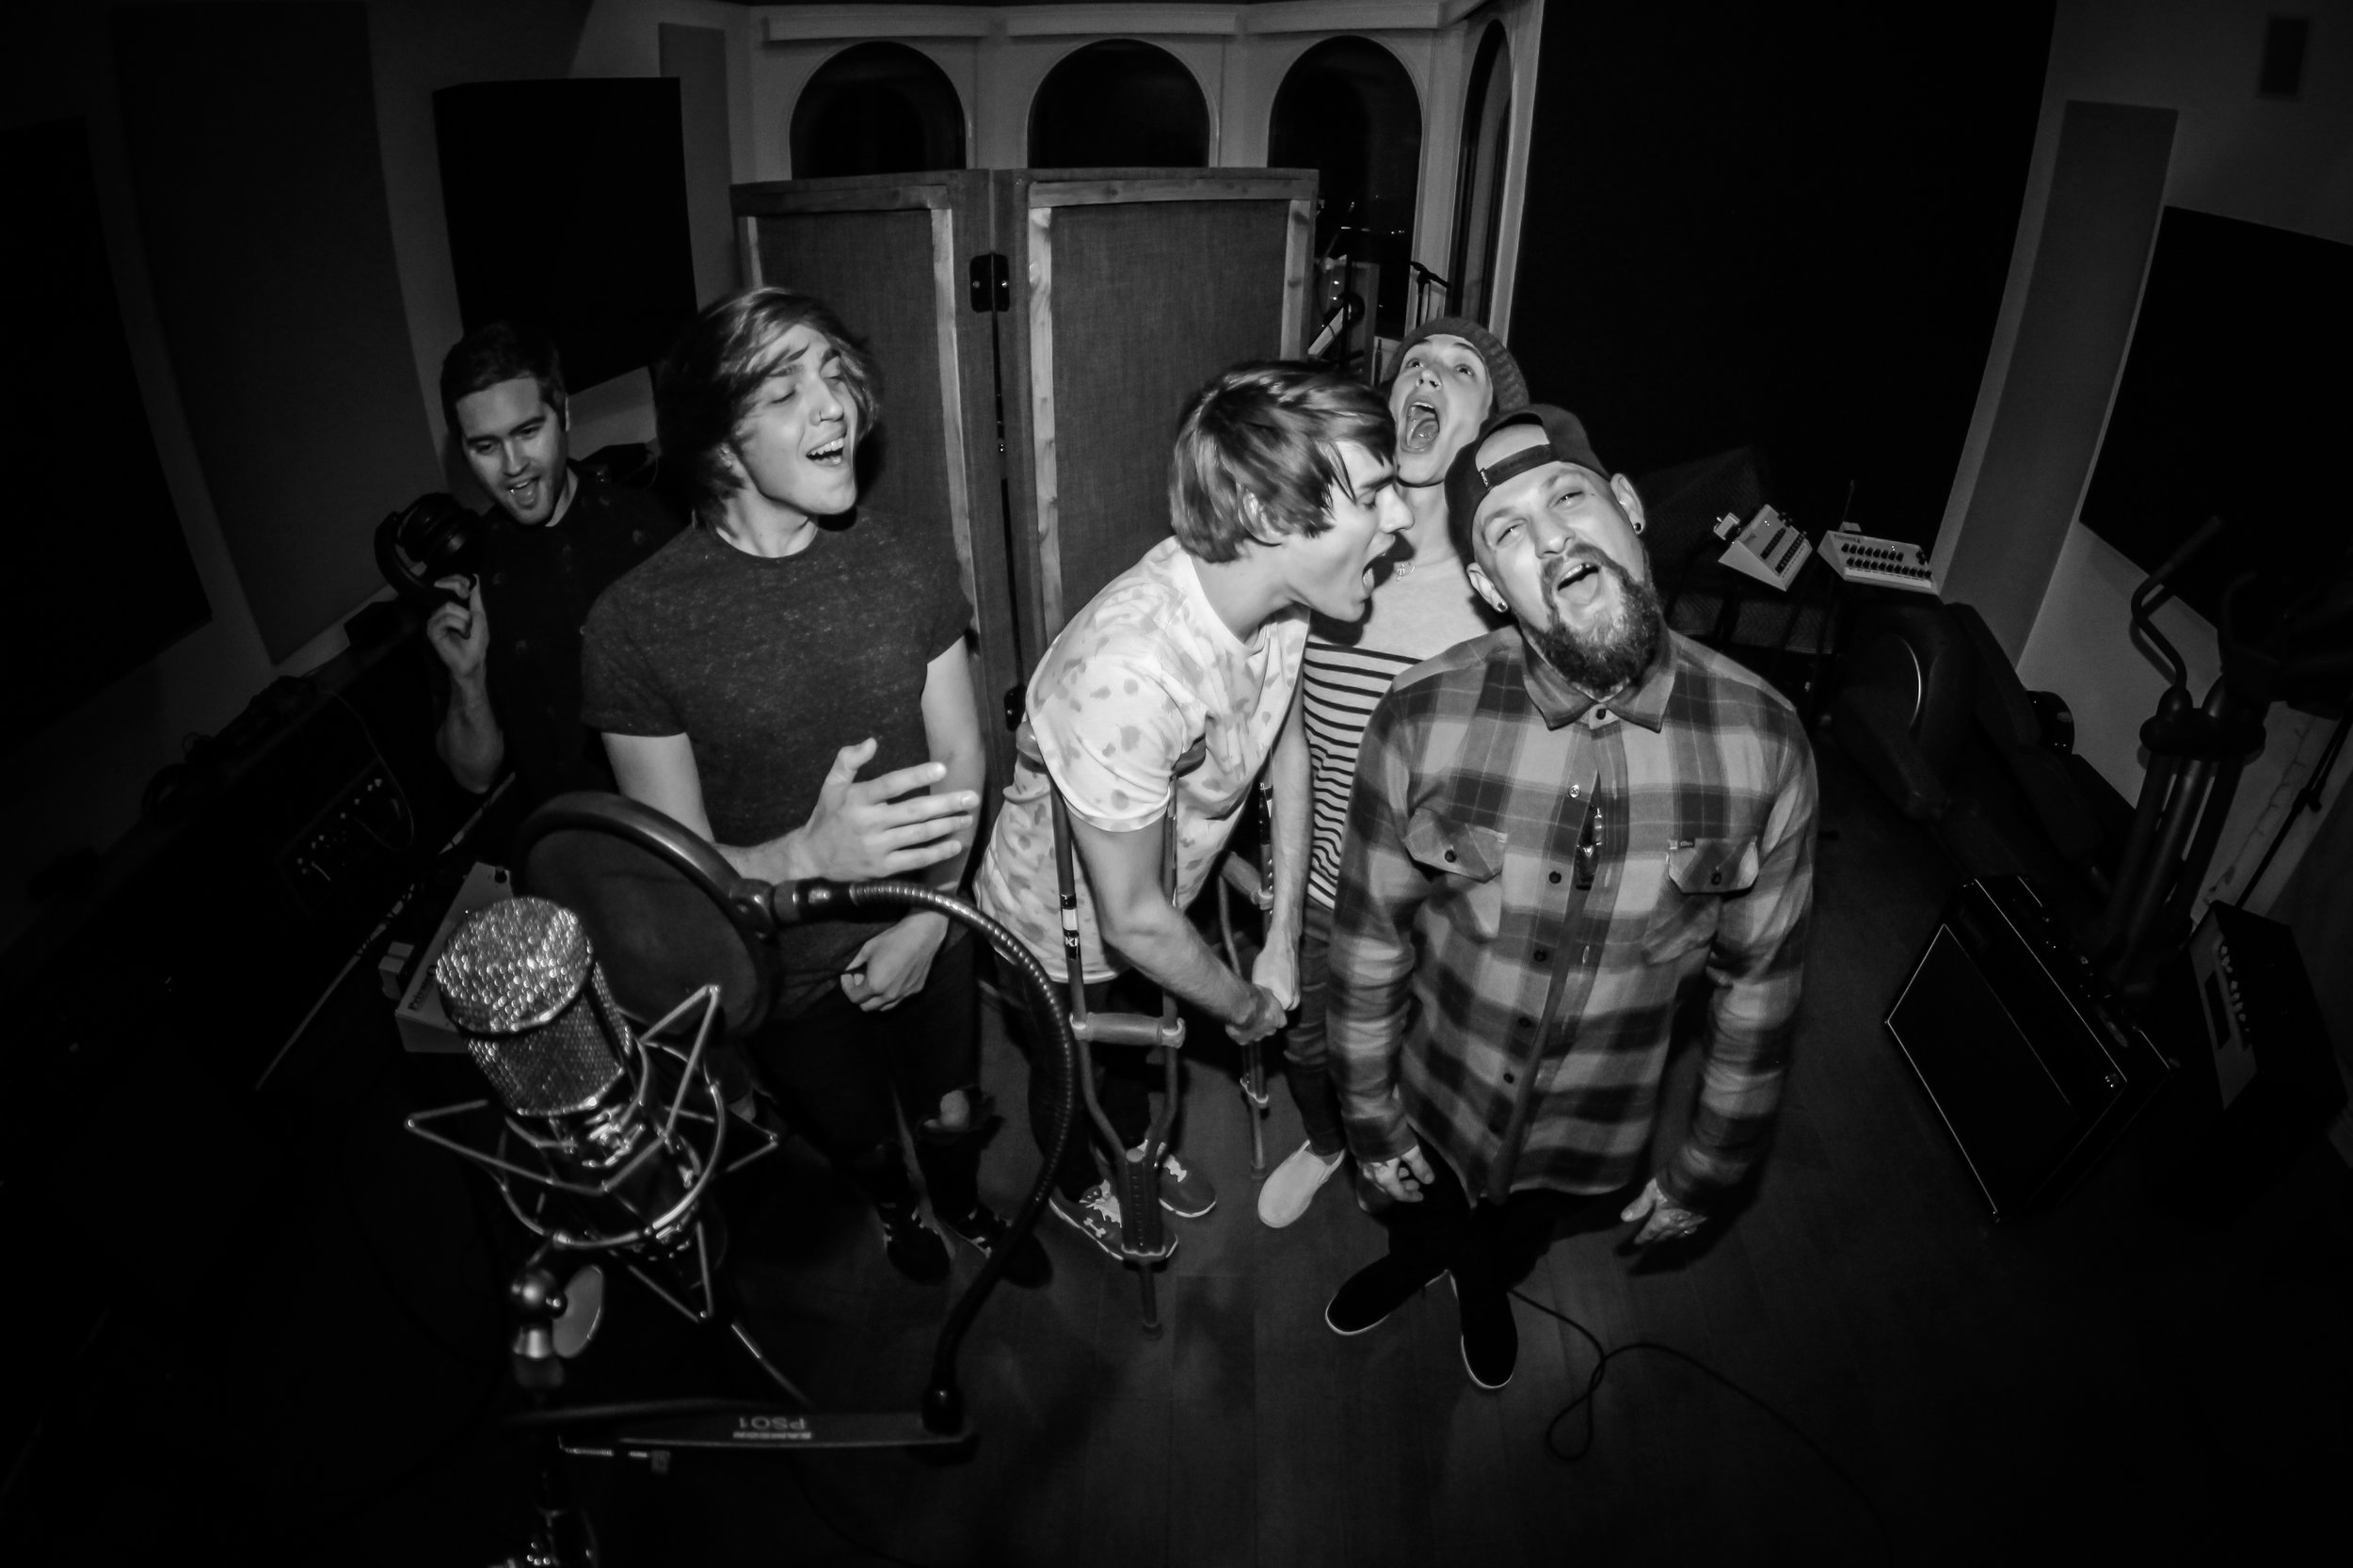  Waterparks, Benji Madden, and Courtney Ballard singing gang vocals for Good Charlotte’s 6th Studio album “Youth Authority” at Foxy Studios 